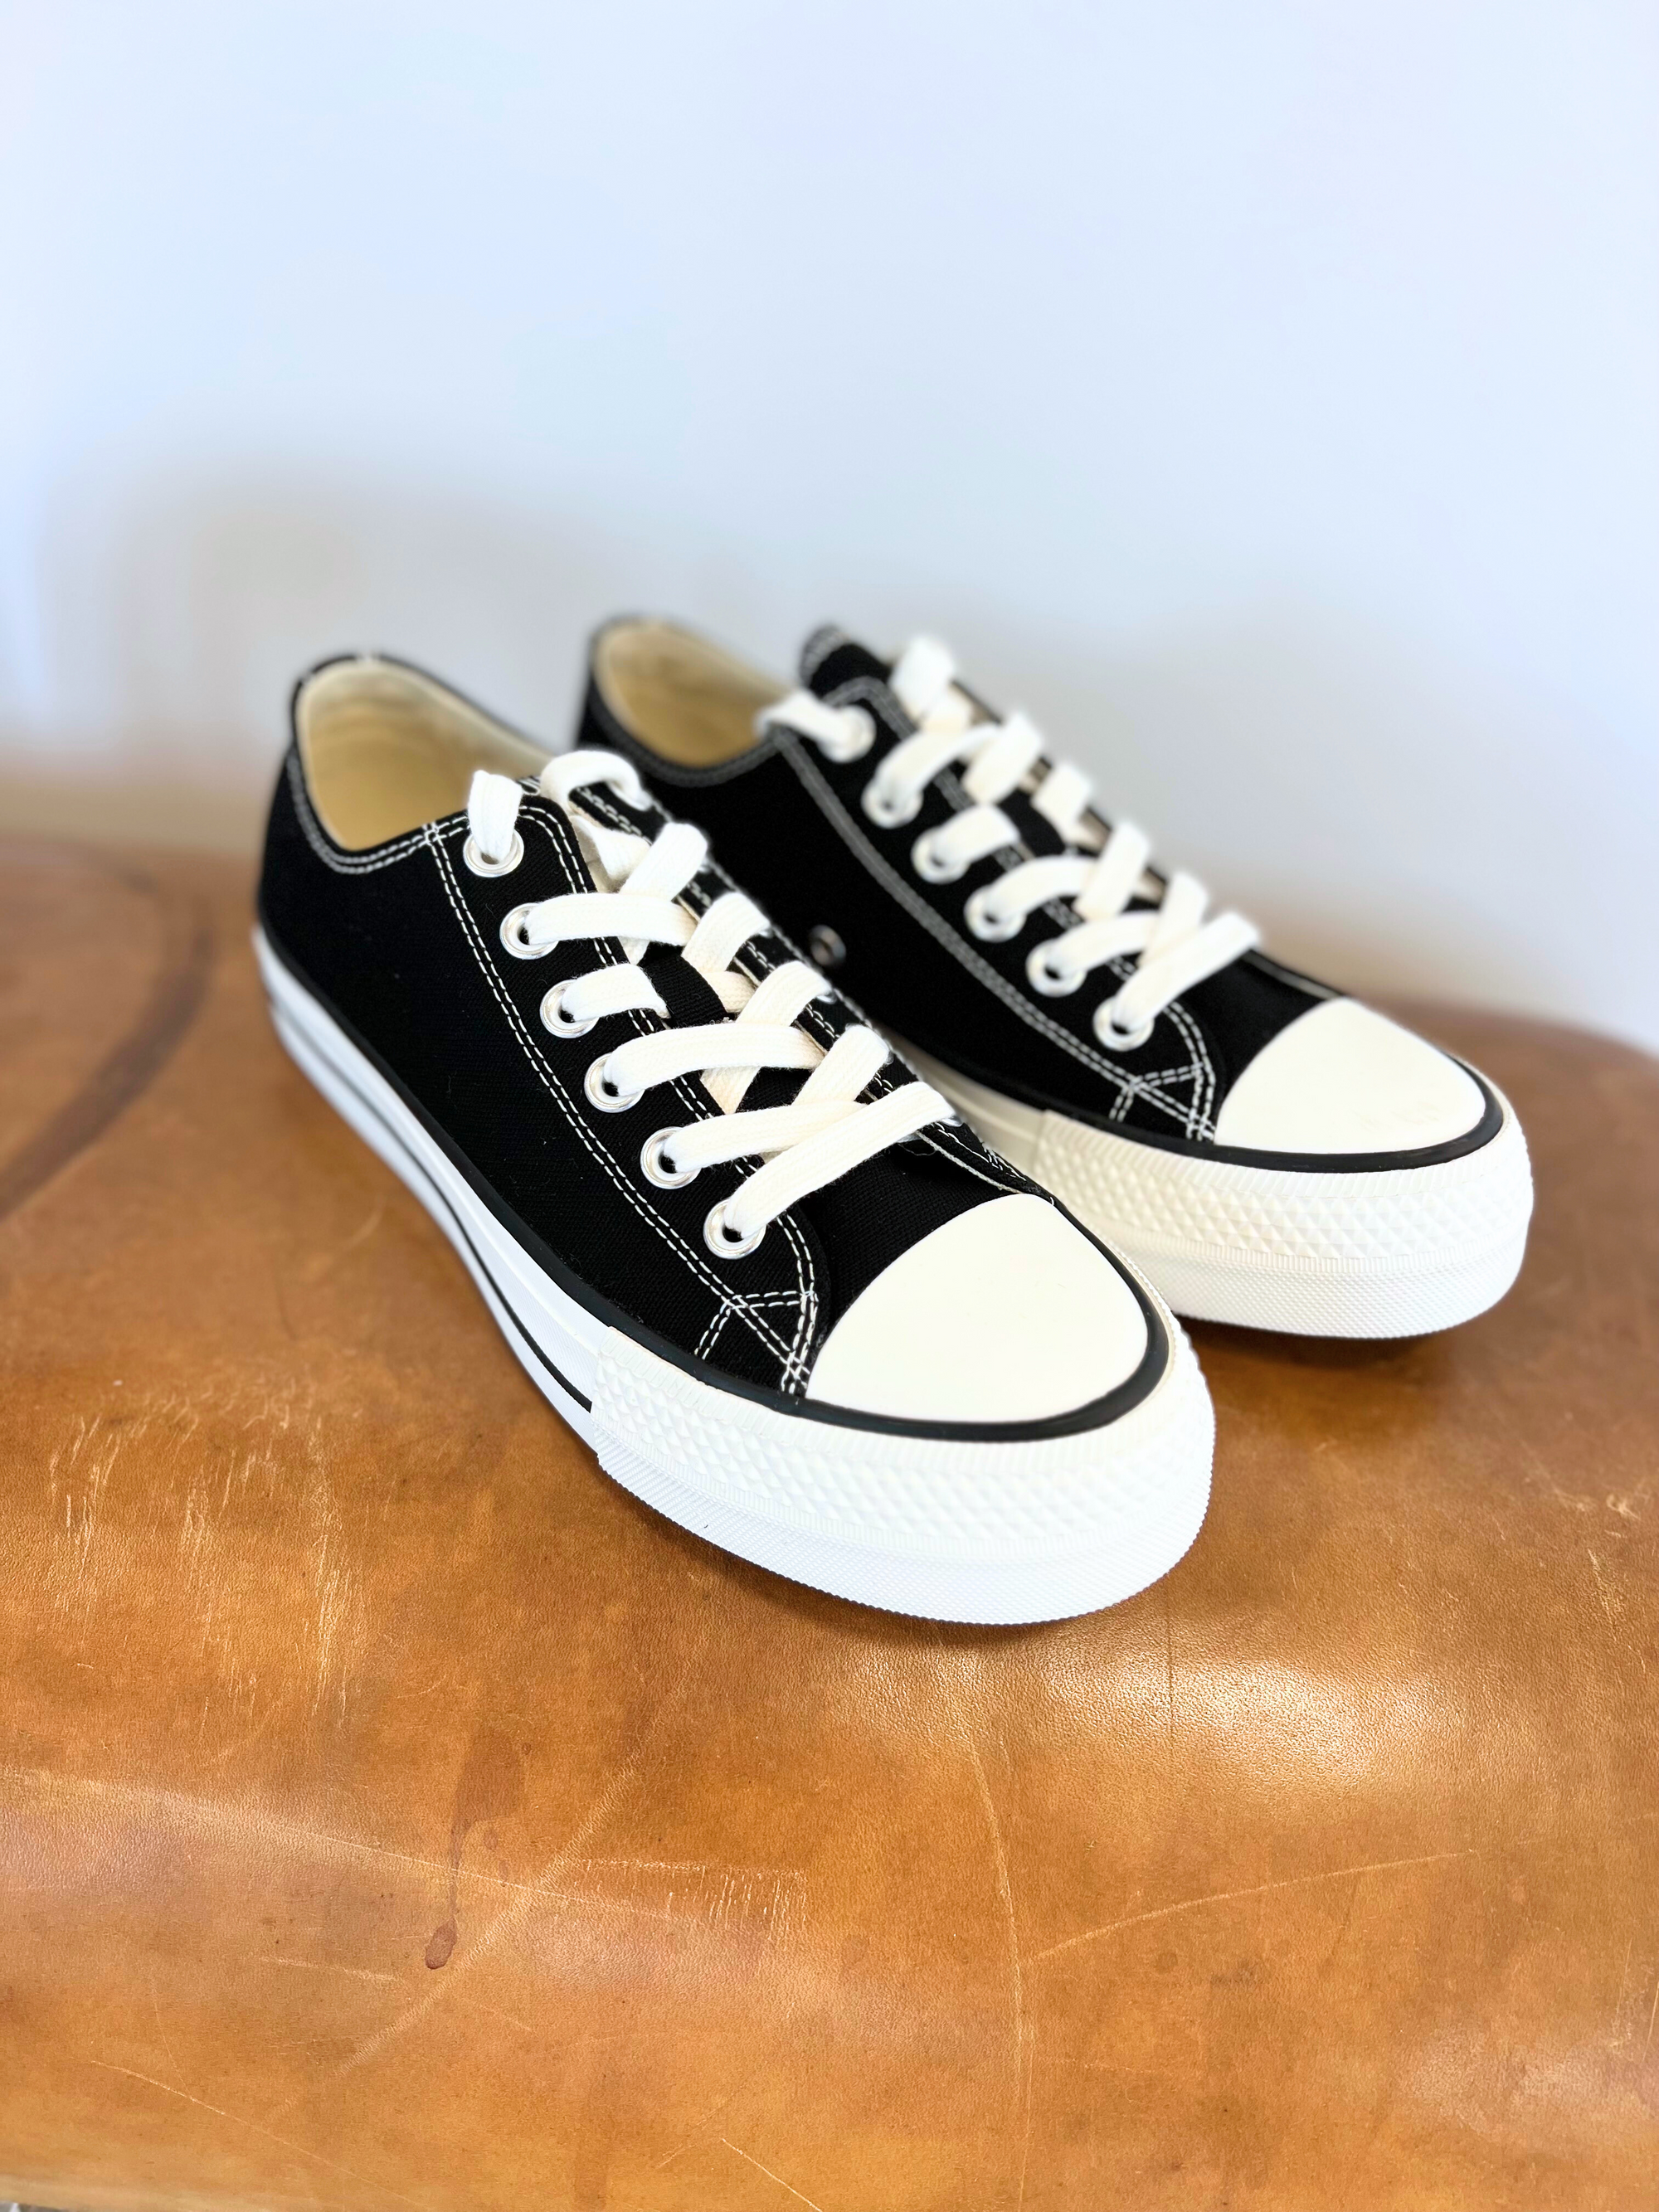 The Kicking it Old School Canvas Sneakers